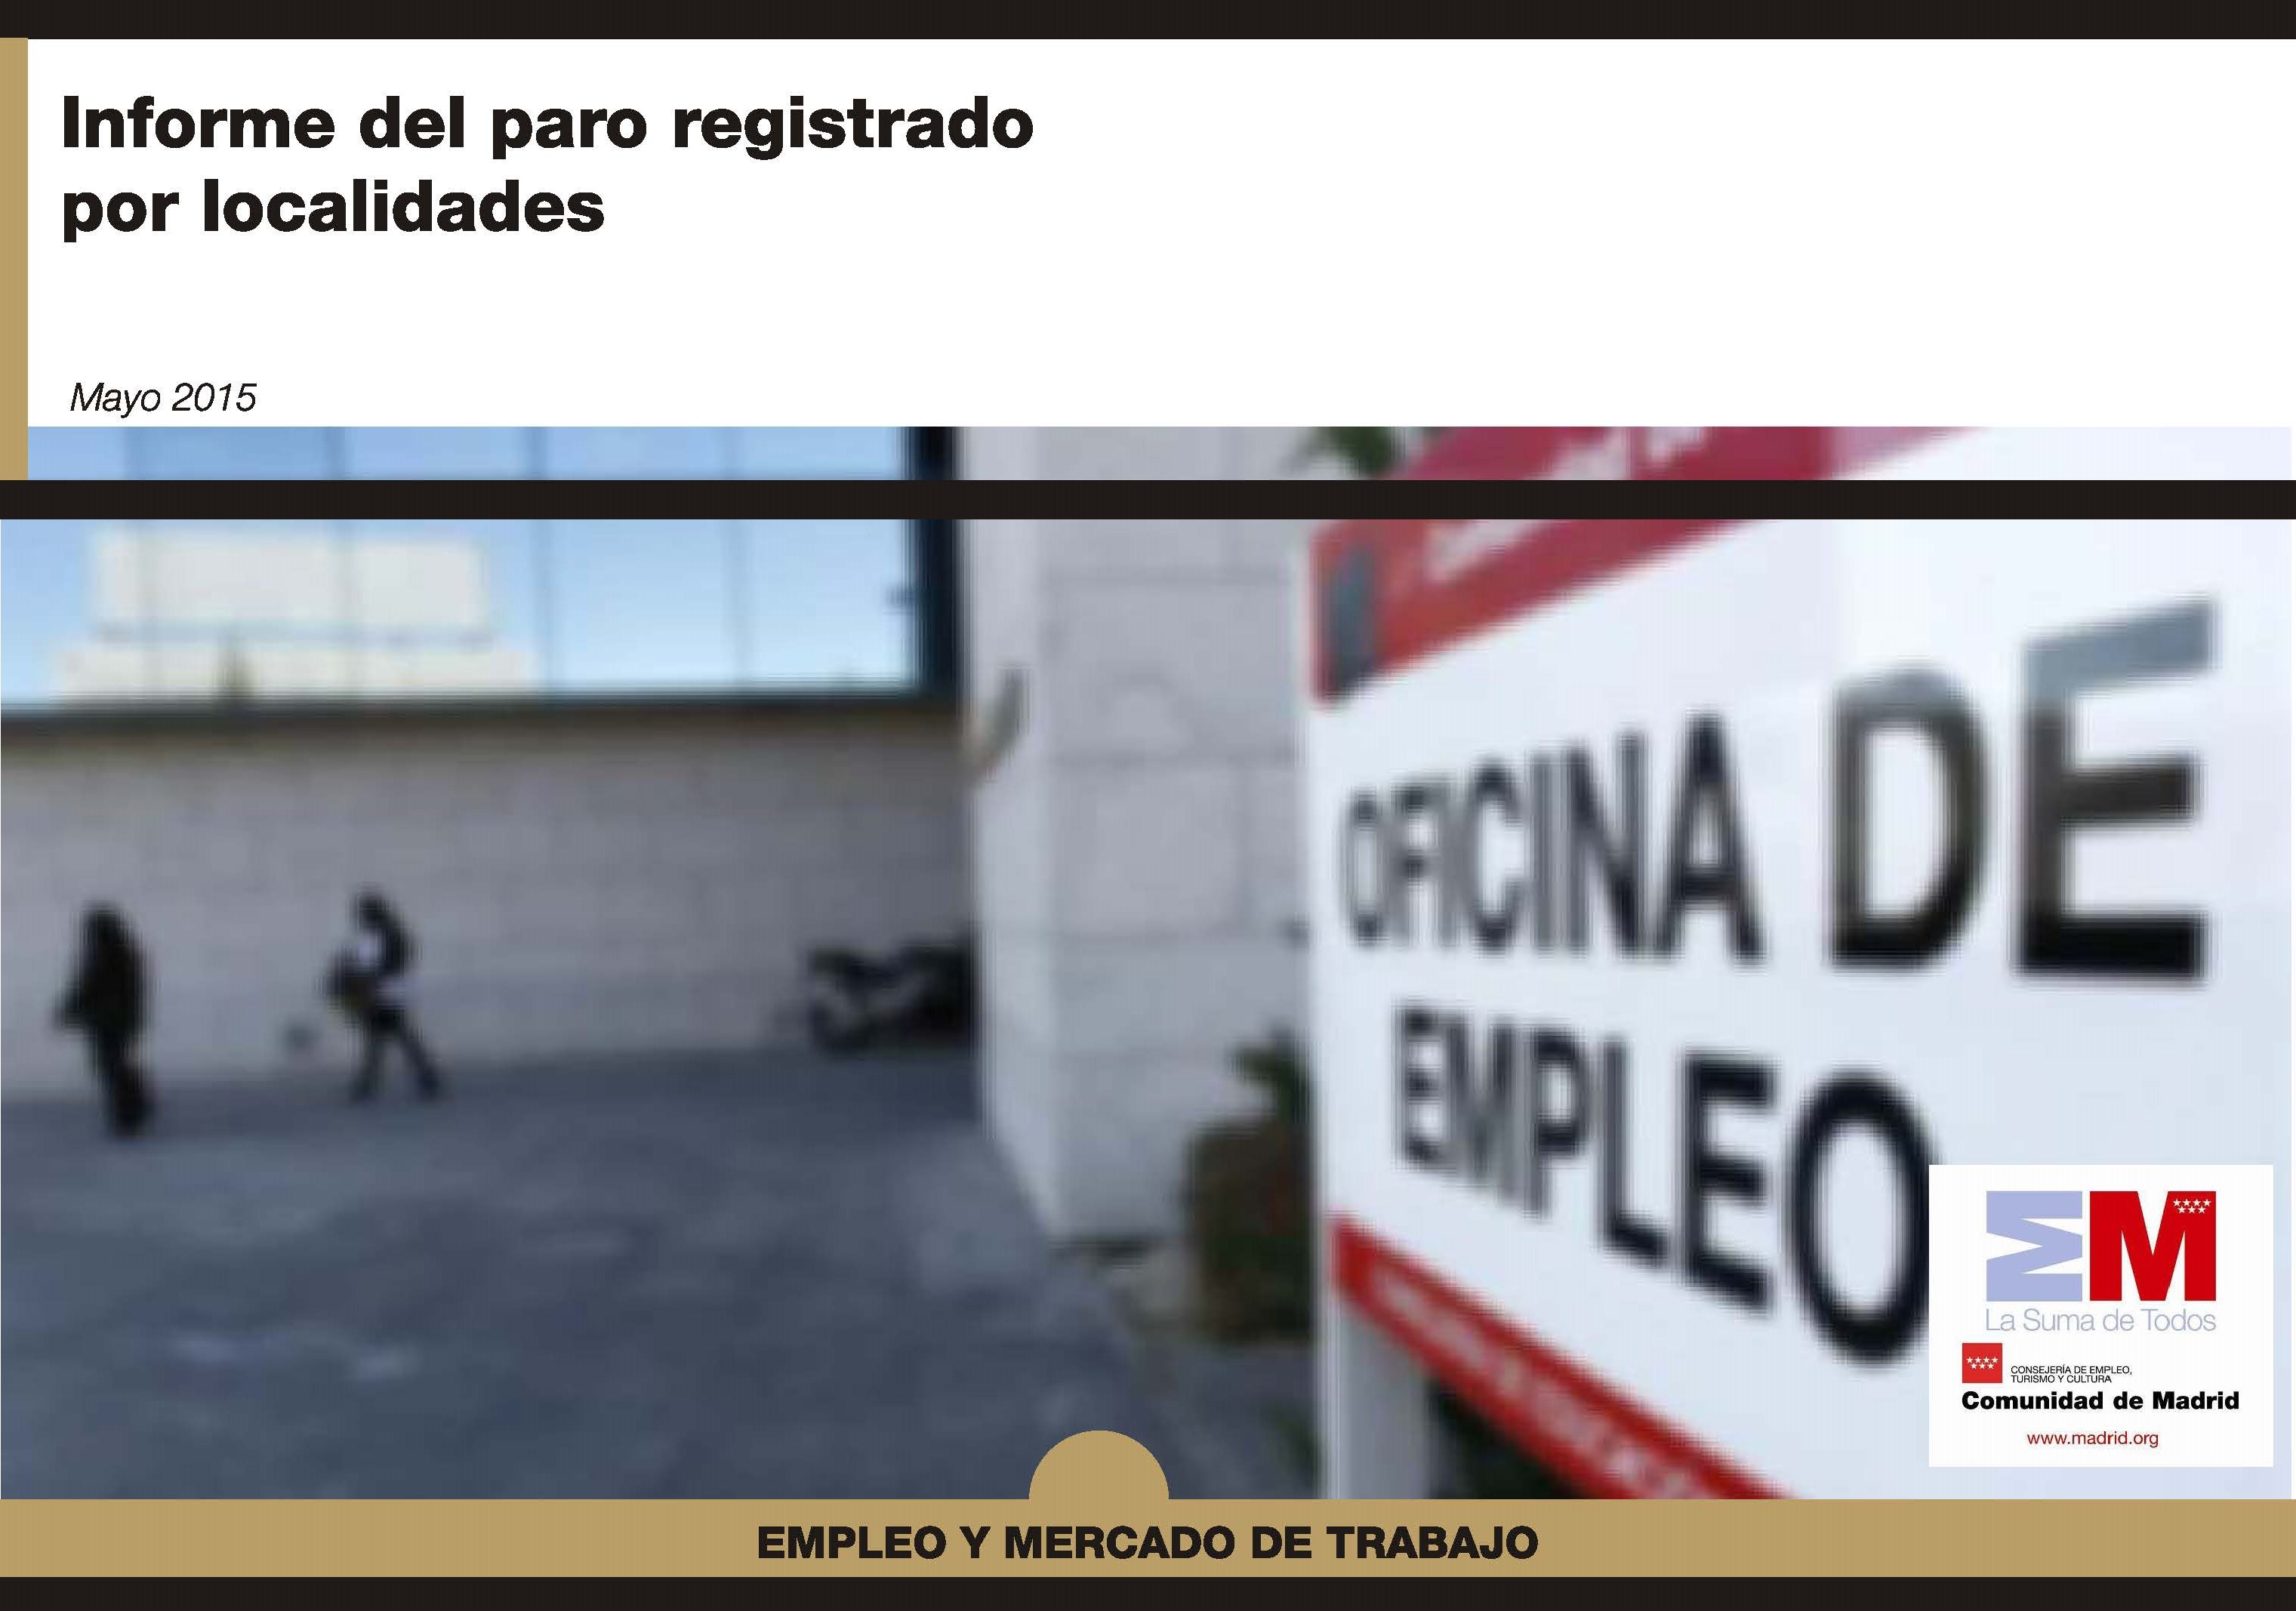 Cover of Report on unemployment registered by municipalities in the Community of Madrid (Periodic publication)